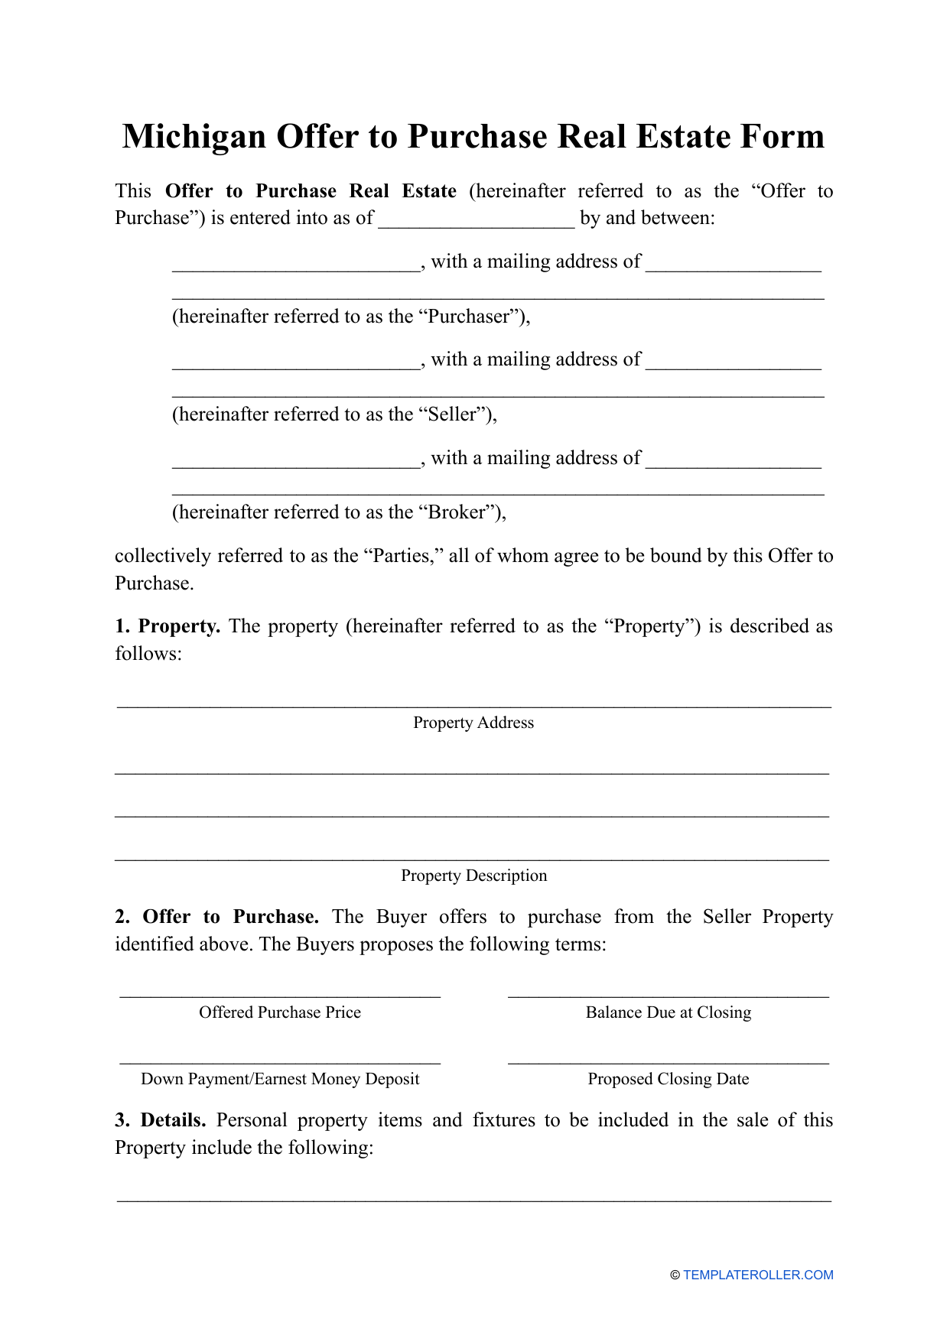 Offer to Purchase Real Estate Form - Michigan, Page 1